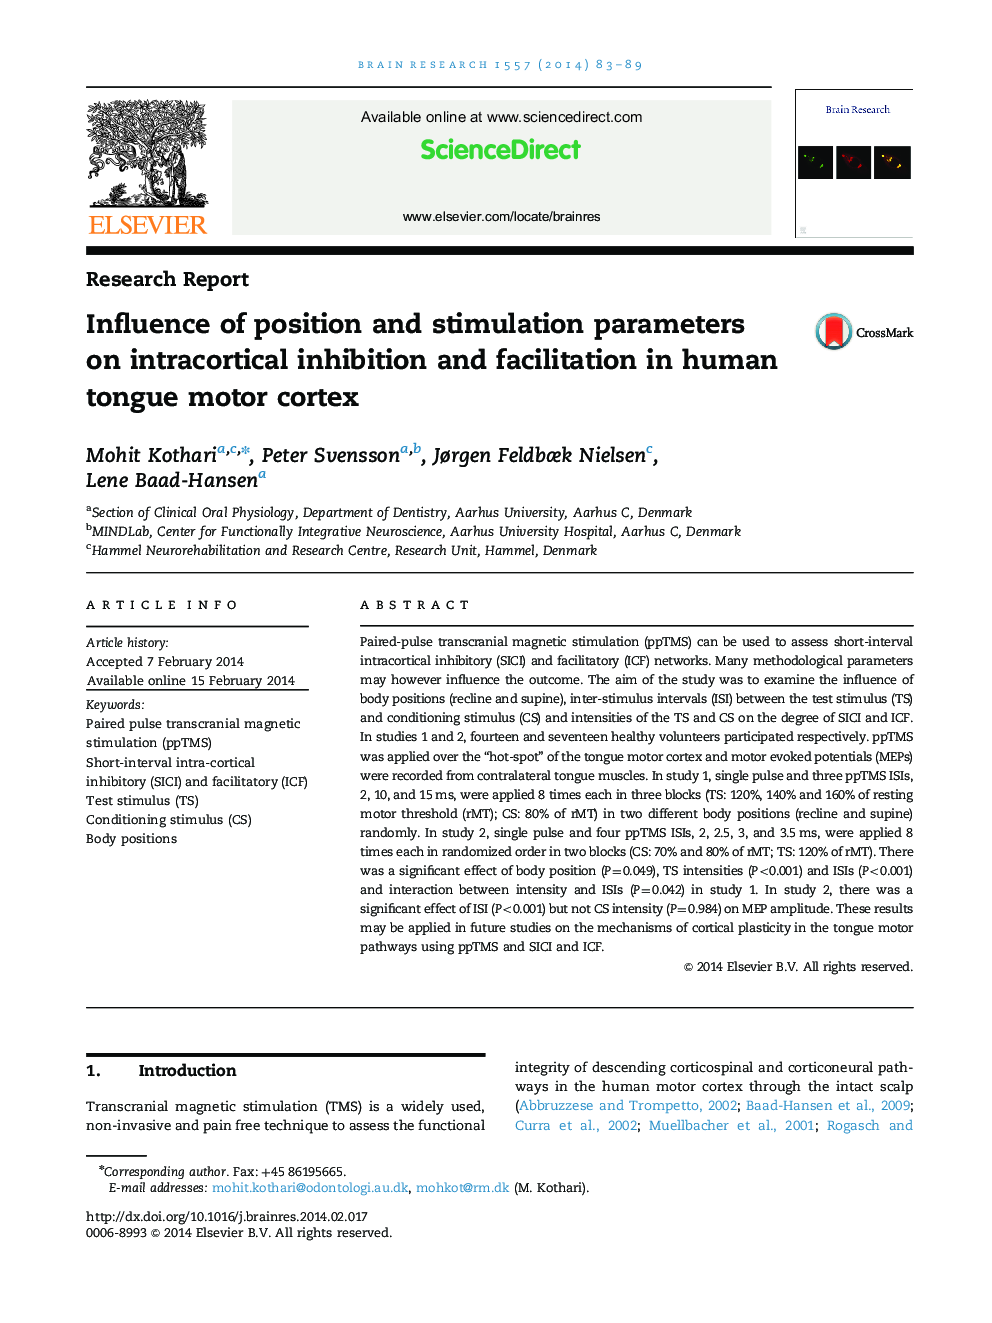 Research ReportInfluence of position and stimulation parameters on intracortical inhibition and facilitation in human tongue motor cortex